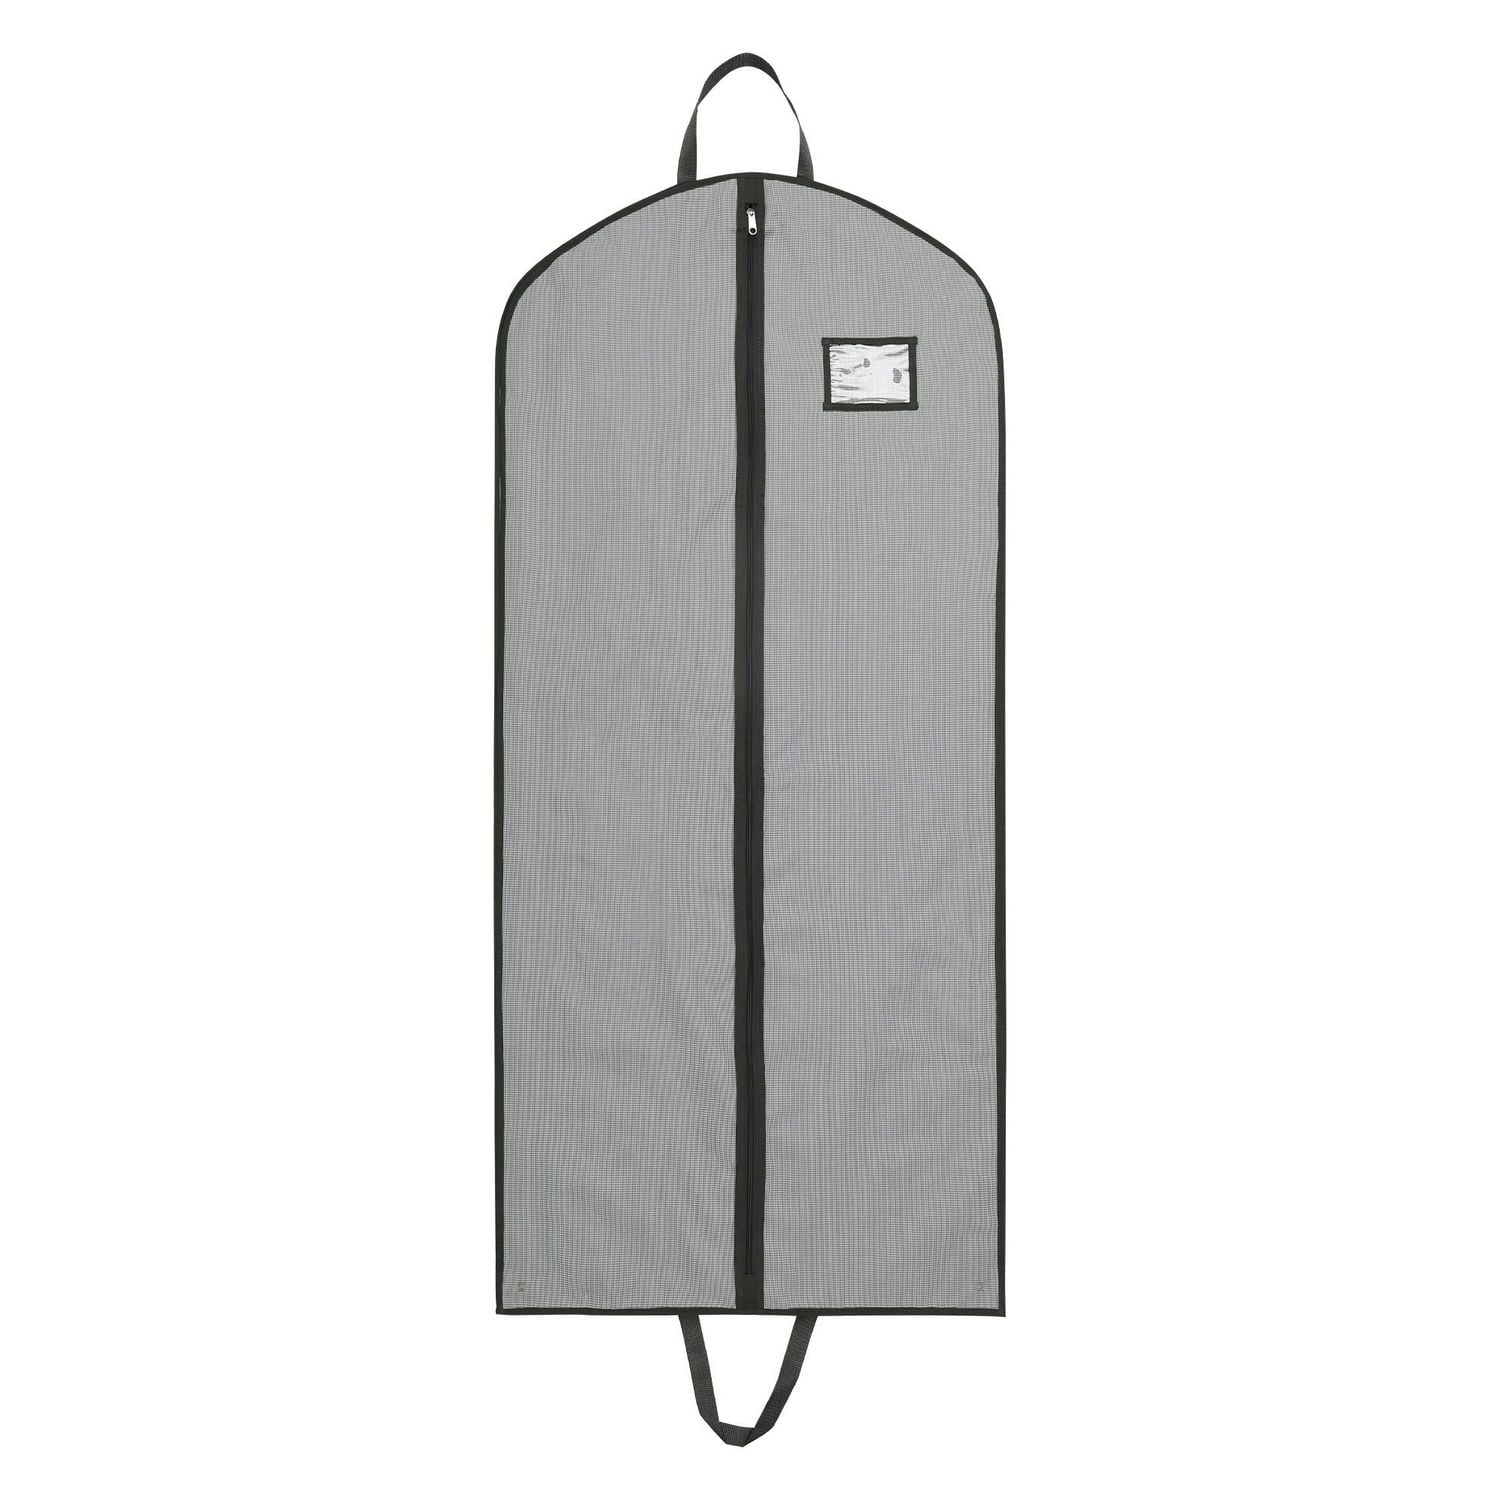 Mainstays Garment Bag for Travel and Storage, Breathable, with Zipper, Carry  Handles for Folding for Suits Dresses Coats, Grey, Item size:24  W x 3  D  x 54  H; Grey color 